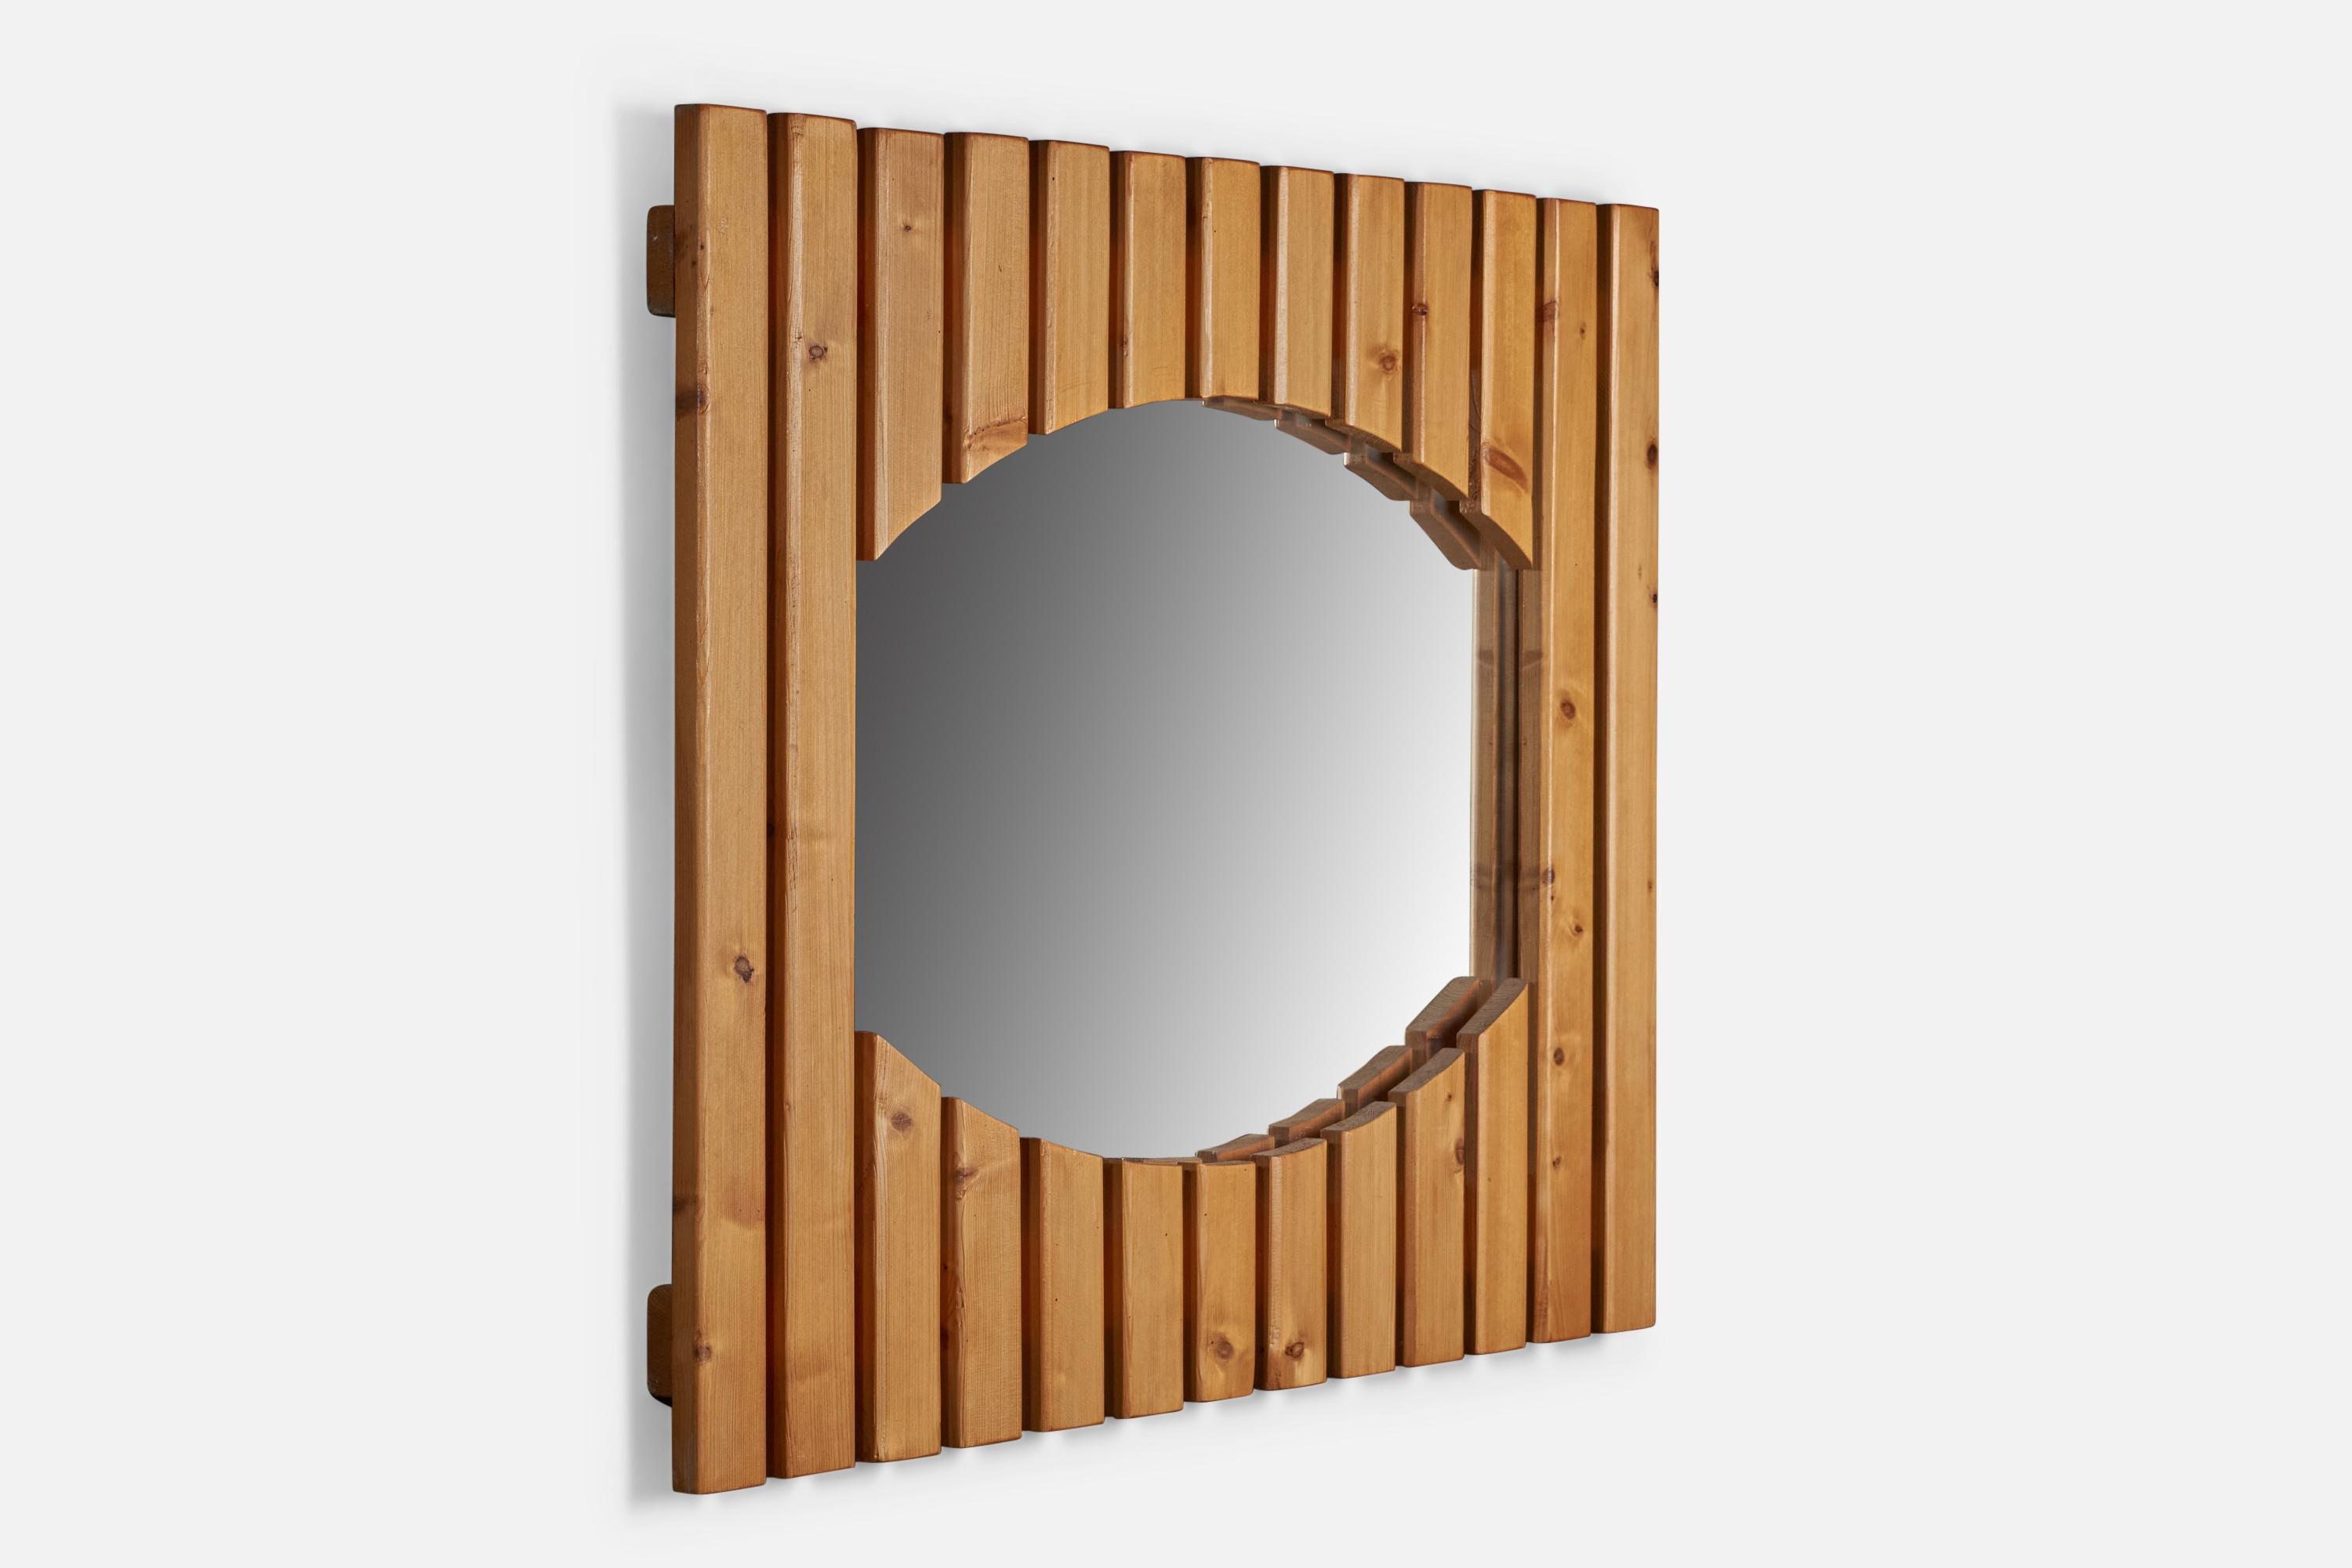 A sizeable slated pine wall mirror designed and produced in Denmark, 1970s.